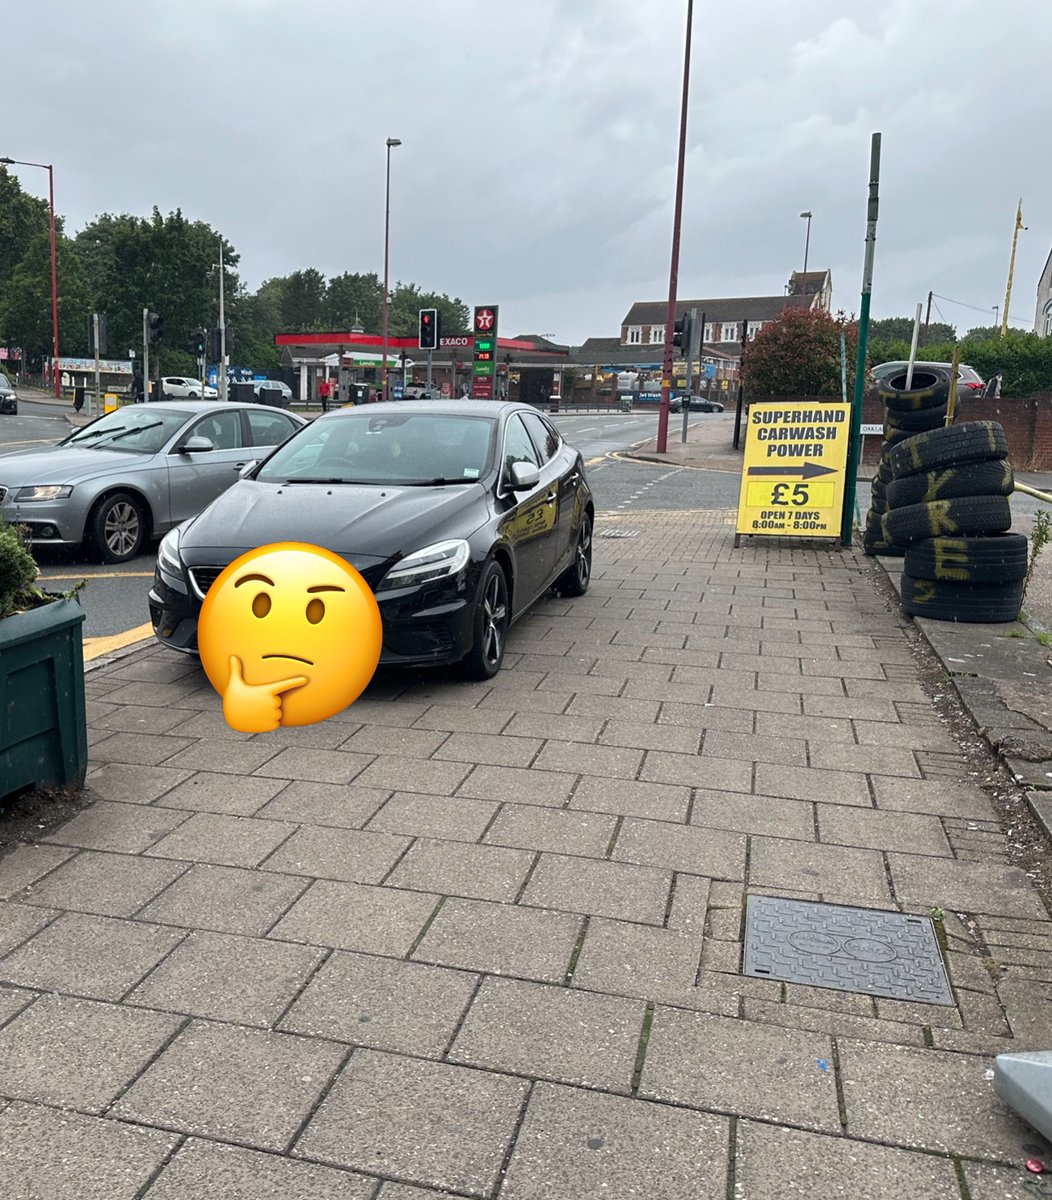 A few examples of illegal & dangerously parked cars in #Handsworth today. Fines & points on licences on their way. @BrumPolice @birmingham_live @SohoRoadBID @for_birmingham @WMPolice